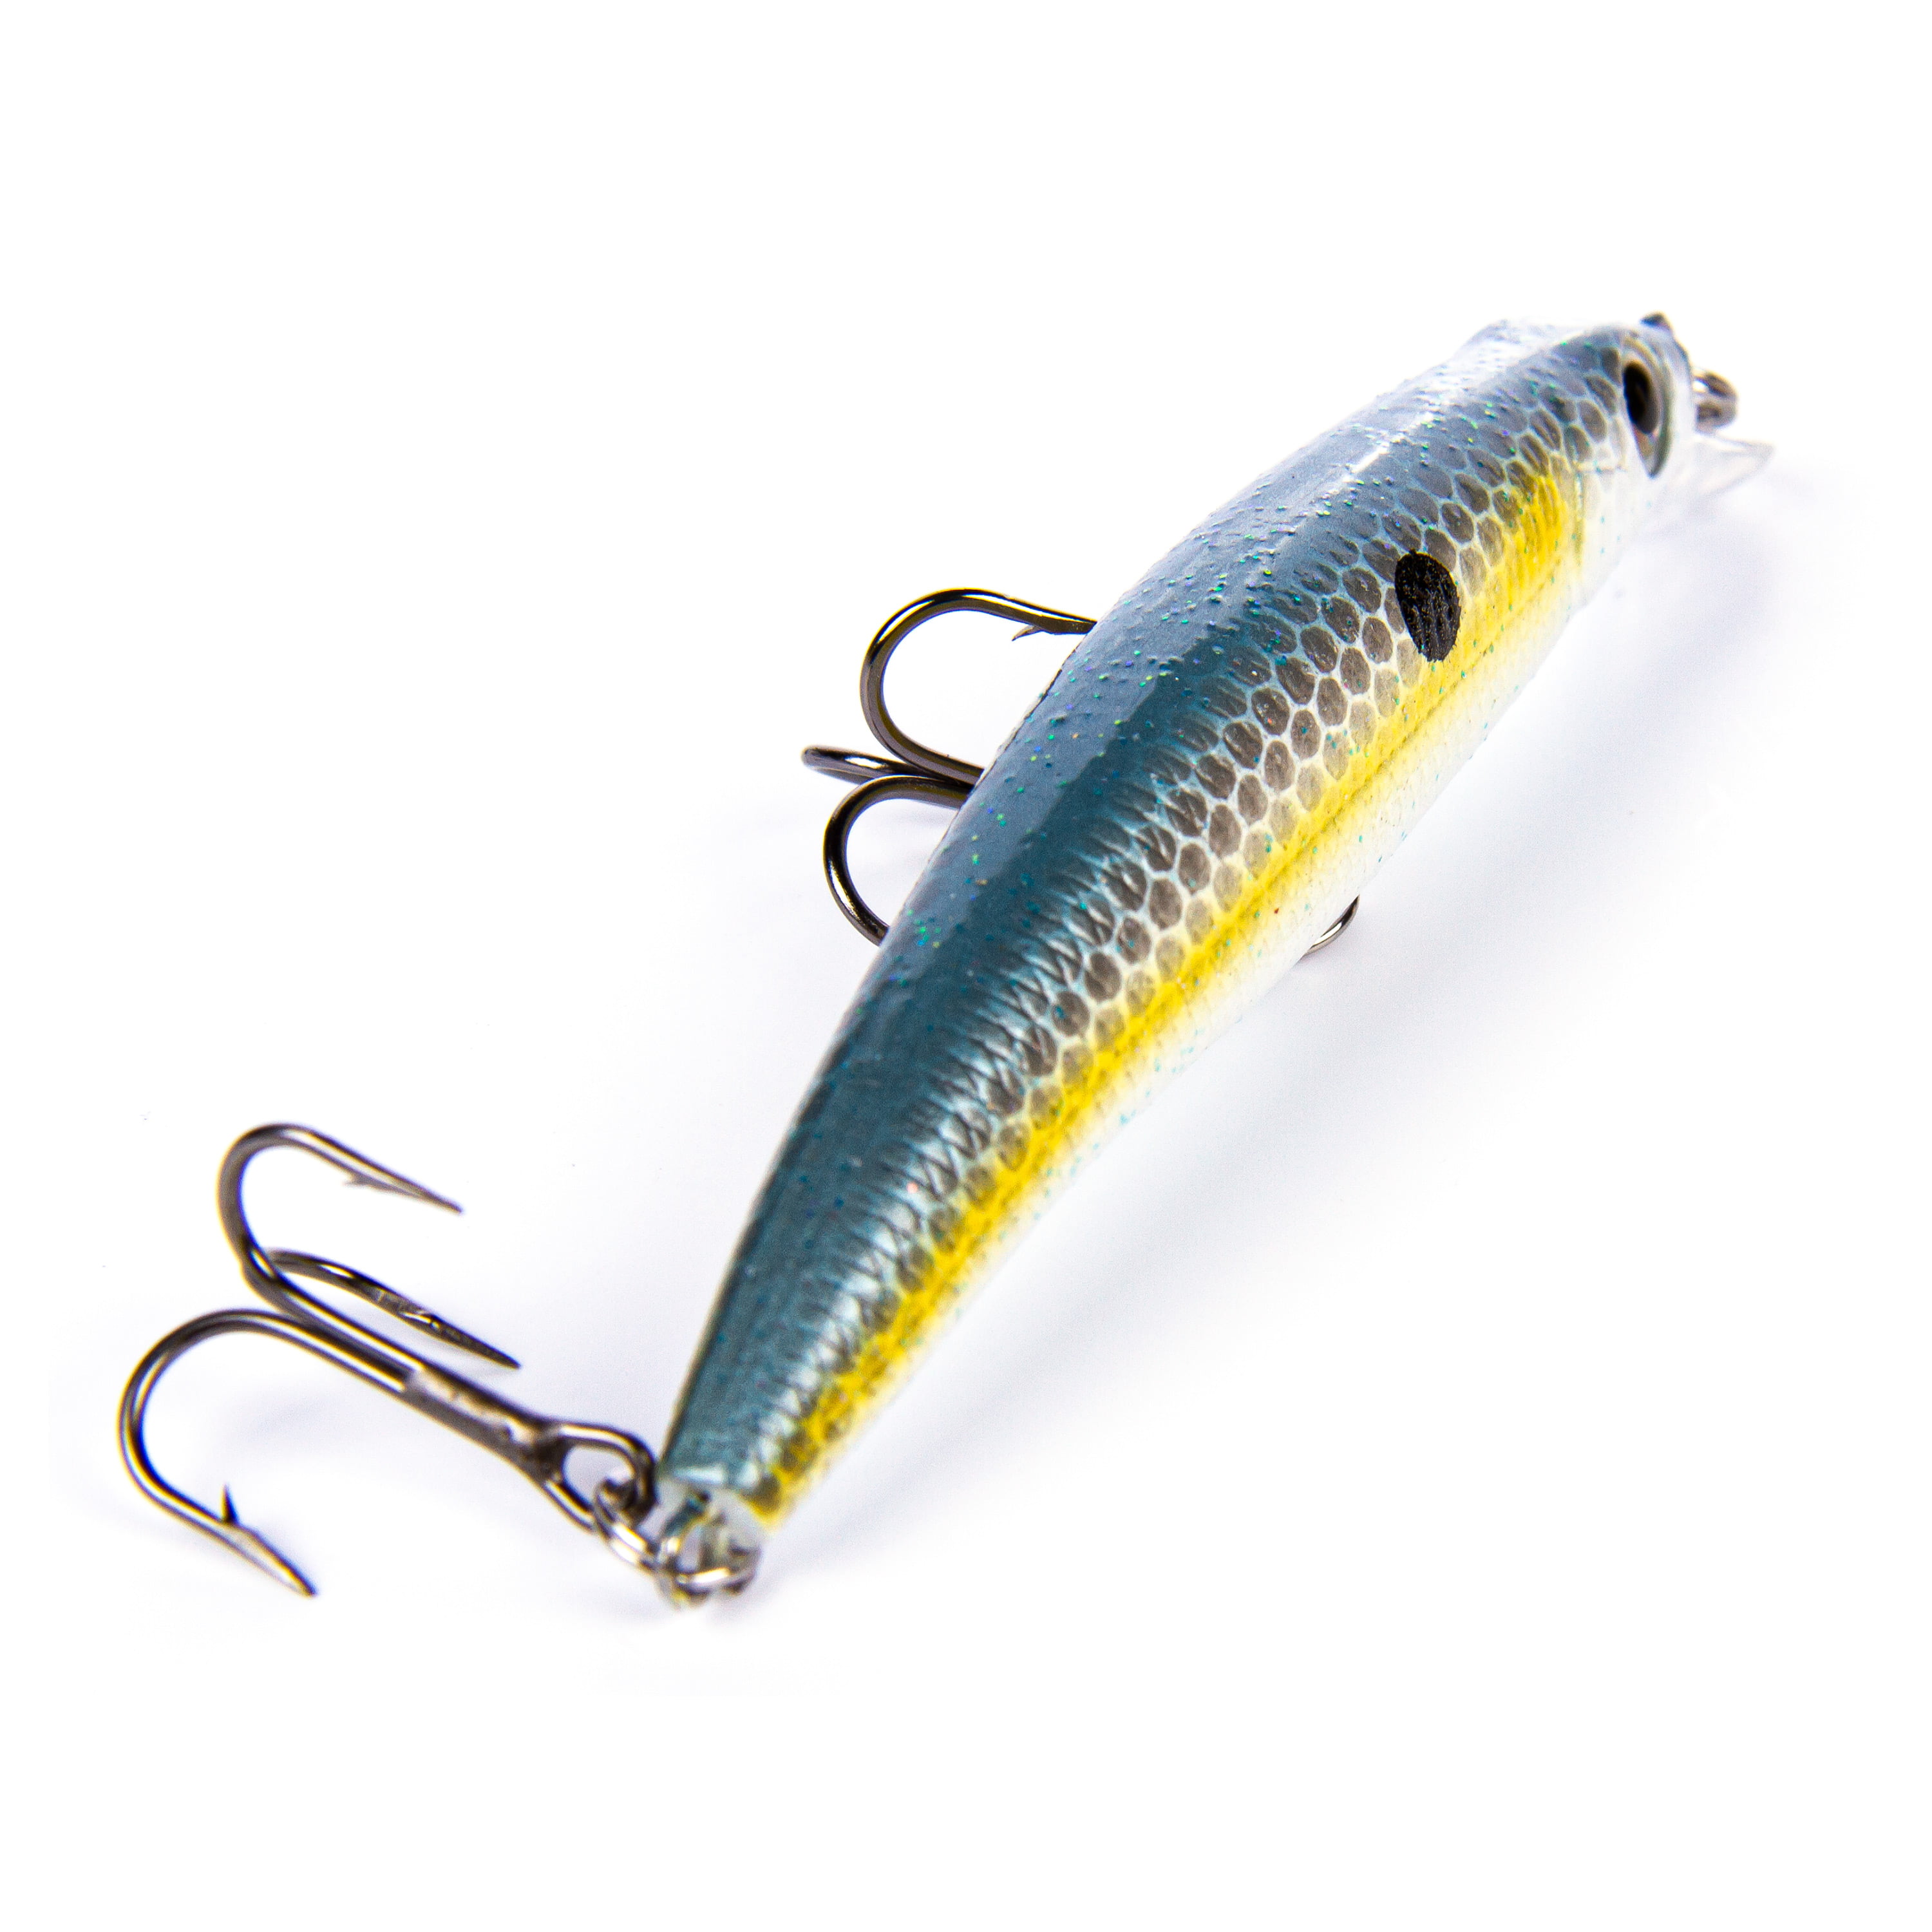 200 Shad Lure Stock Photos - Free & Royalty-Free Stock Photos from